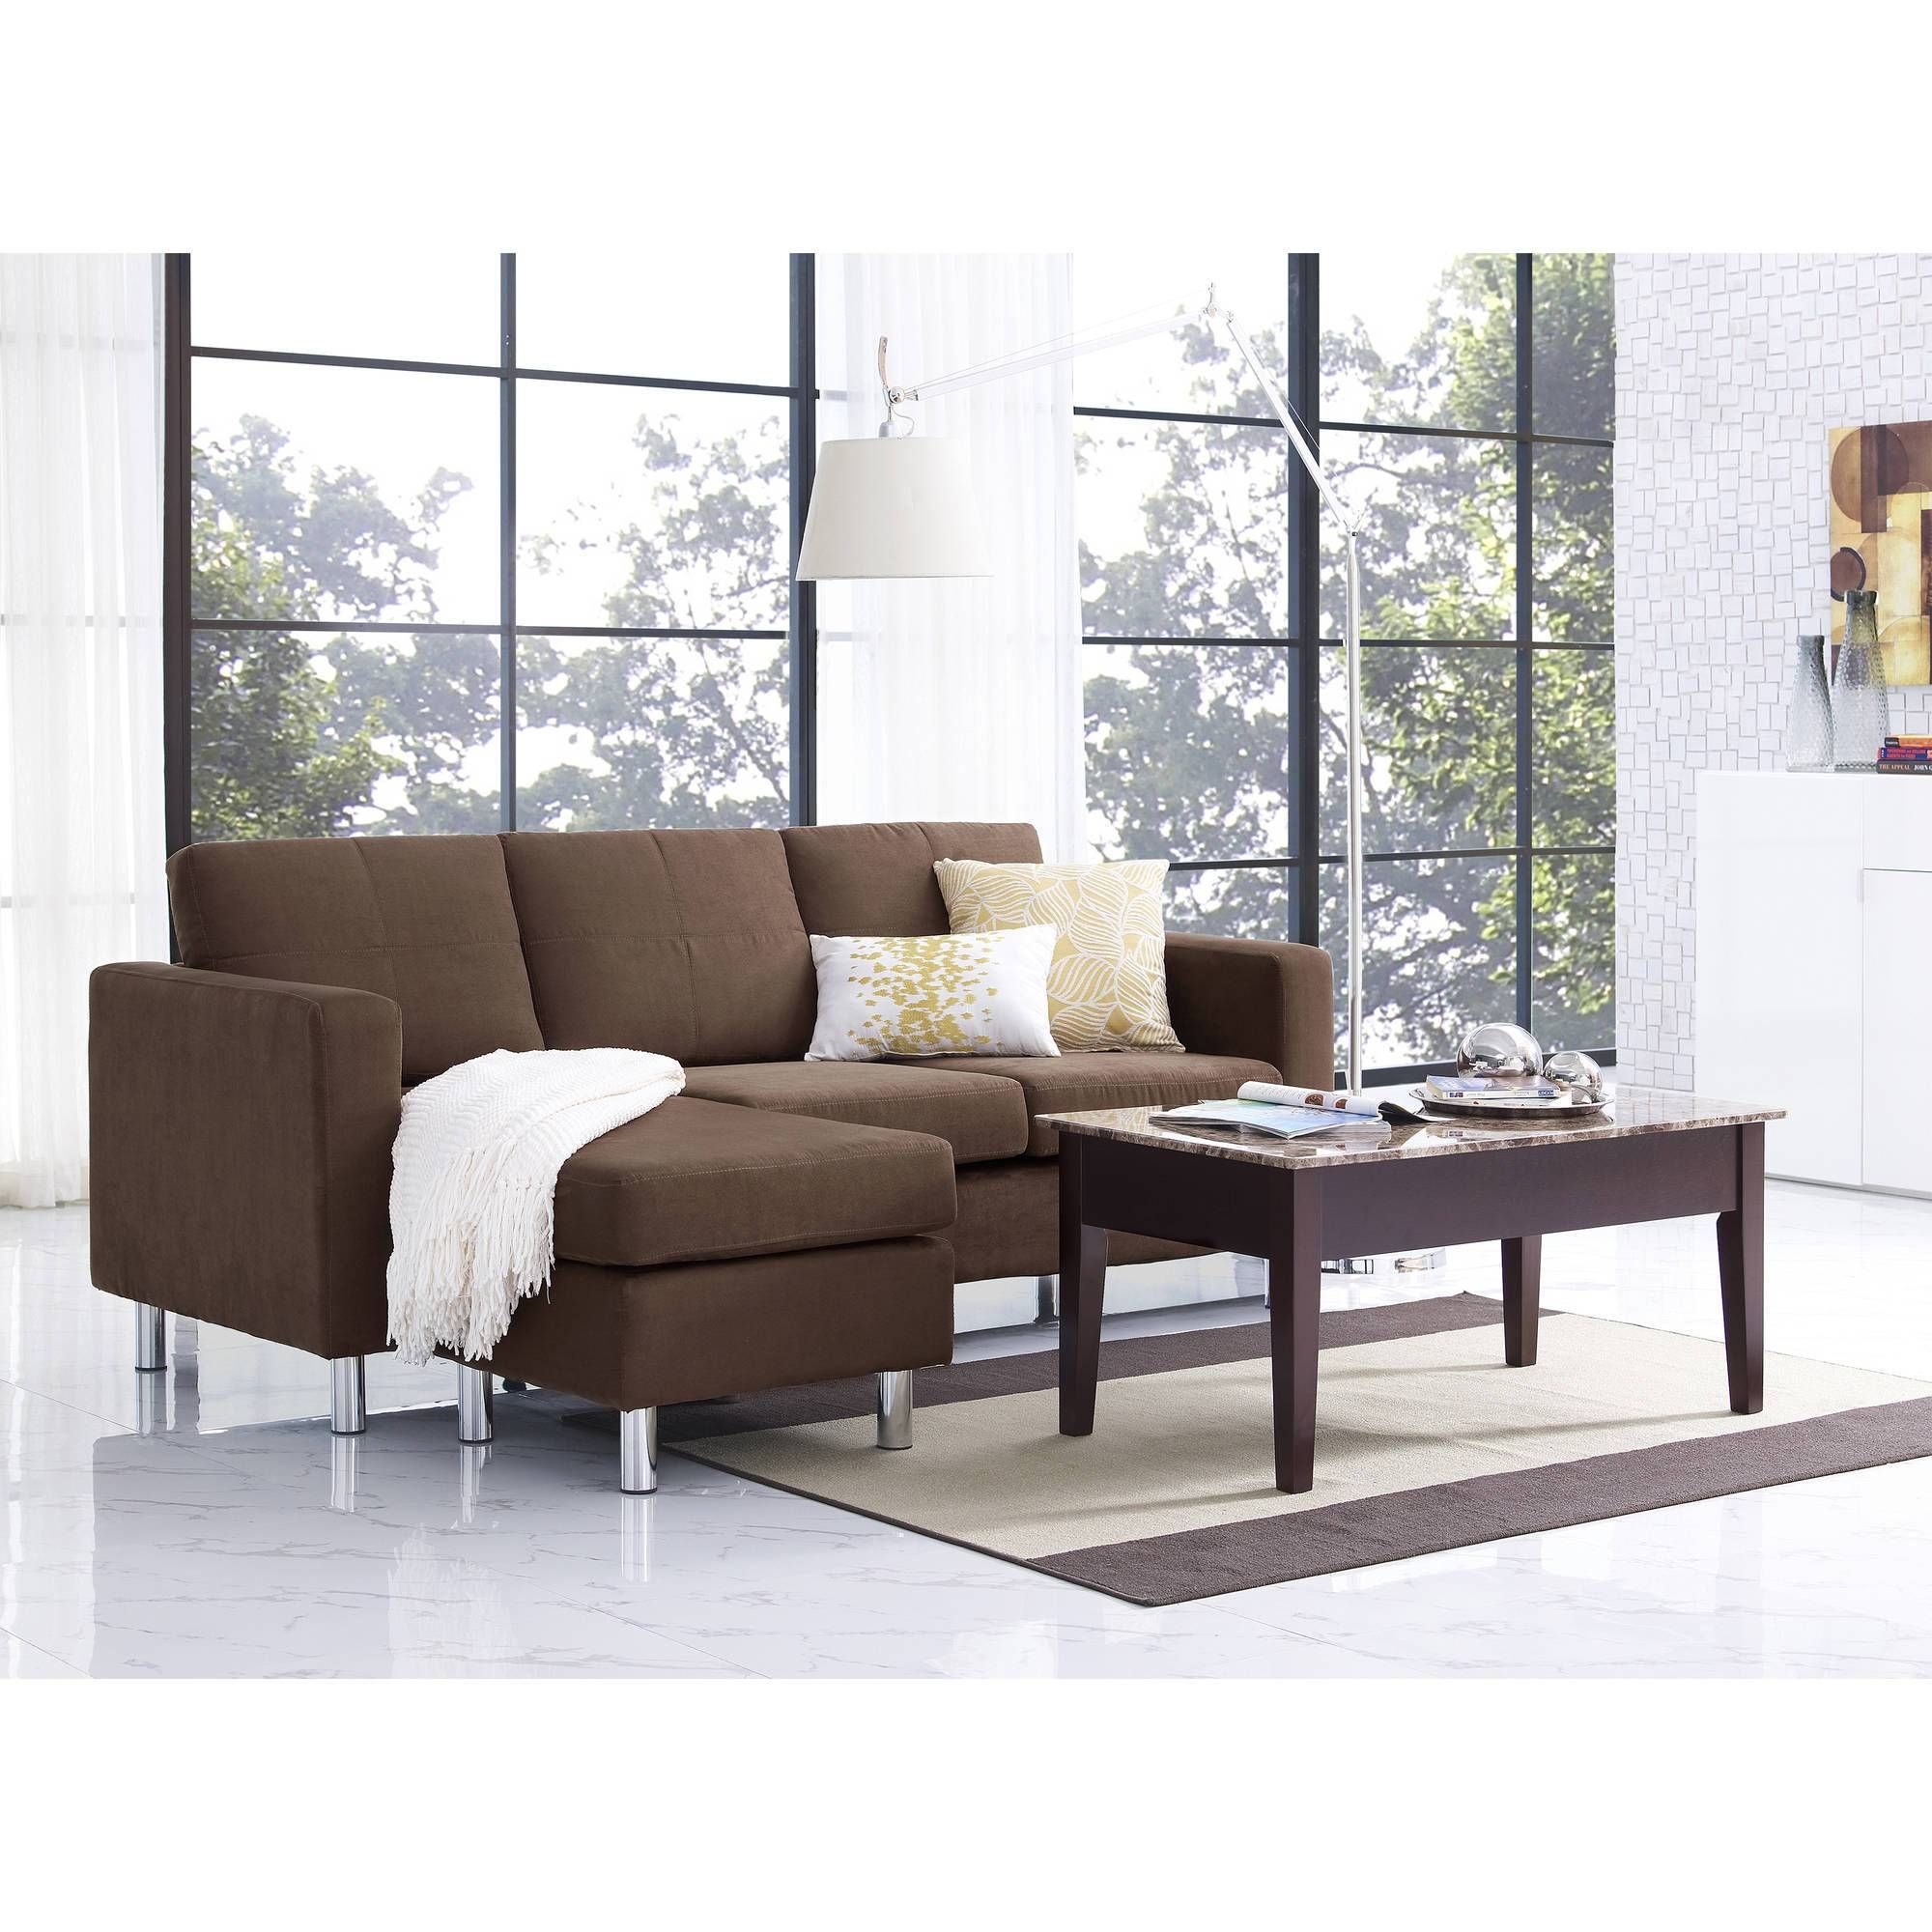 Dorel Living Small Spaces Configurable Sectional Sofa, Multiple Within Sectional Sofas In Small Spaces (Photo 7 of 25)